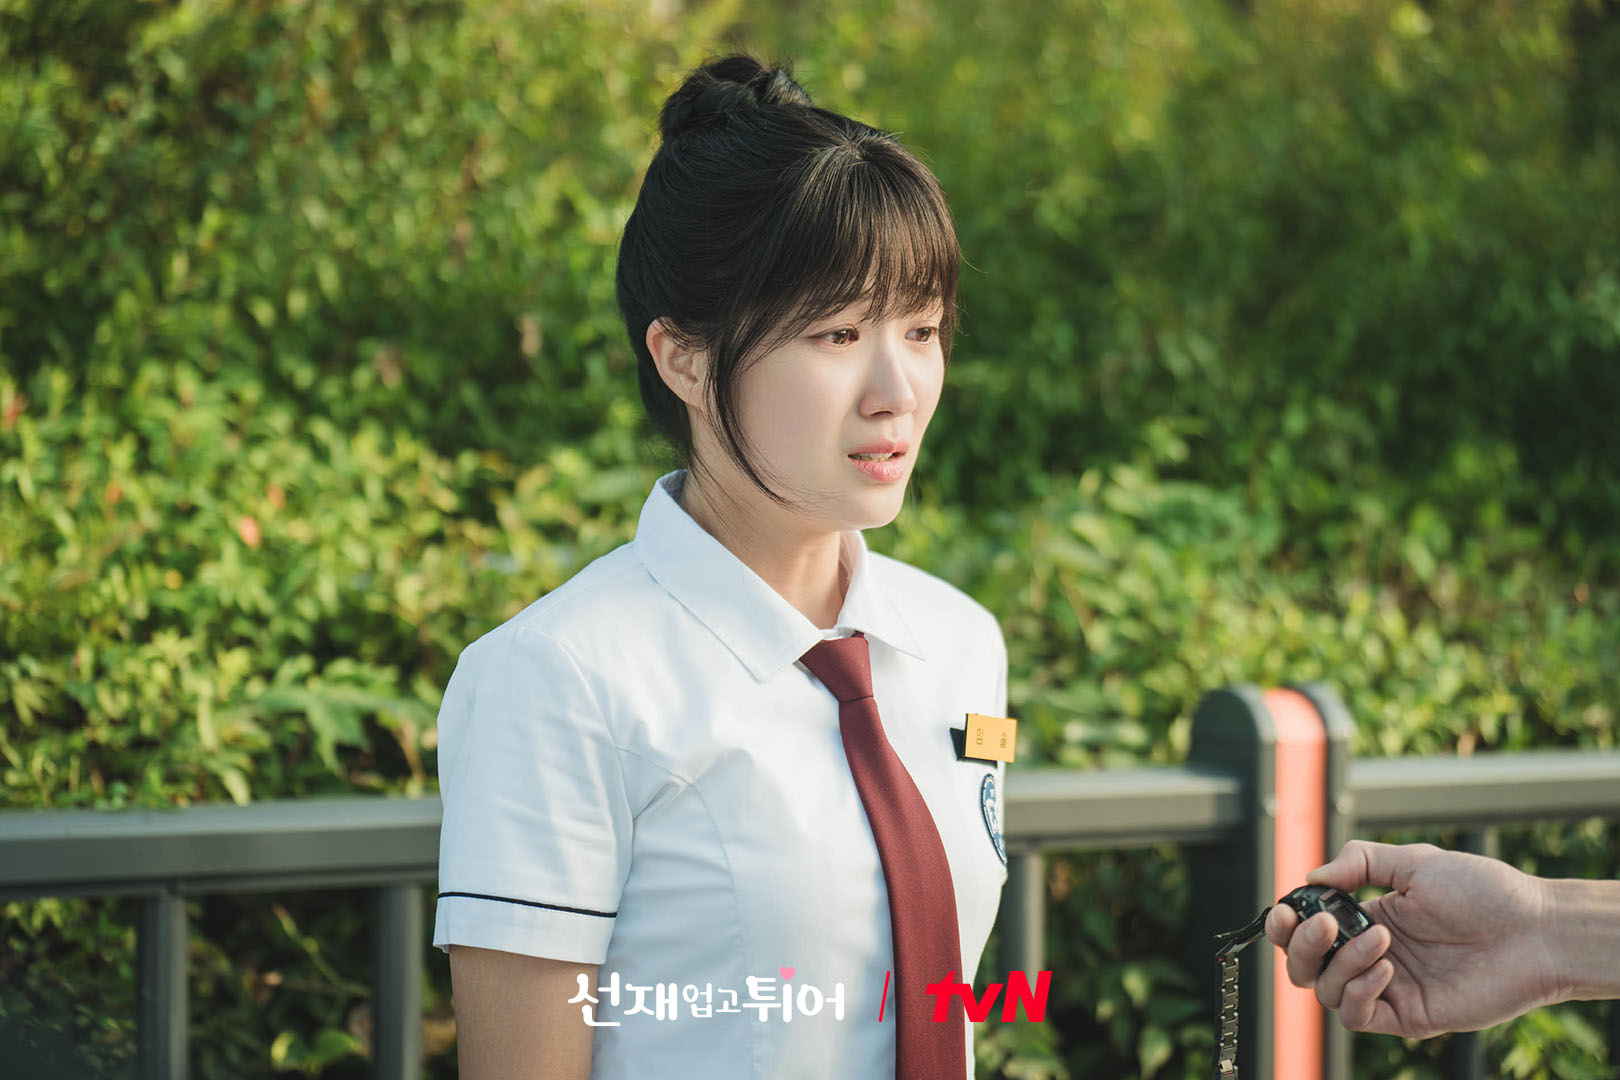 Kim Hye Yoon Portrays Multifaceted Role As Both Adult Fan Girl And Resolute Student In 